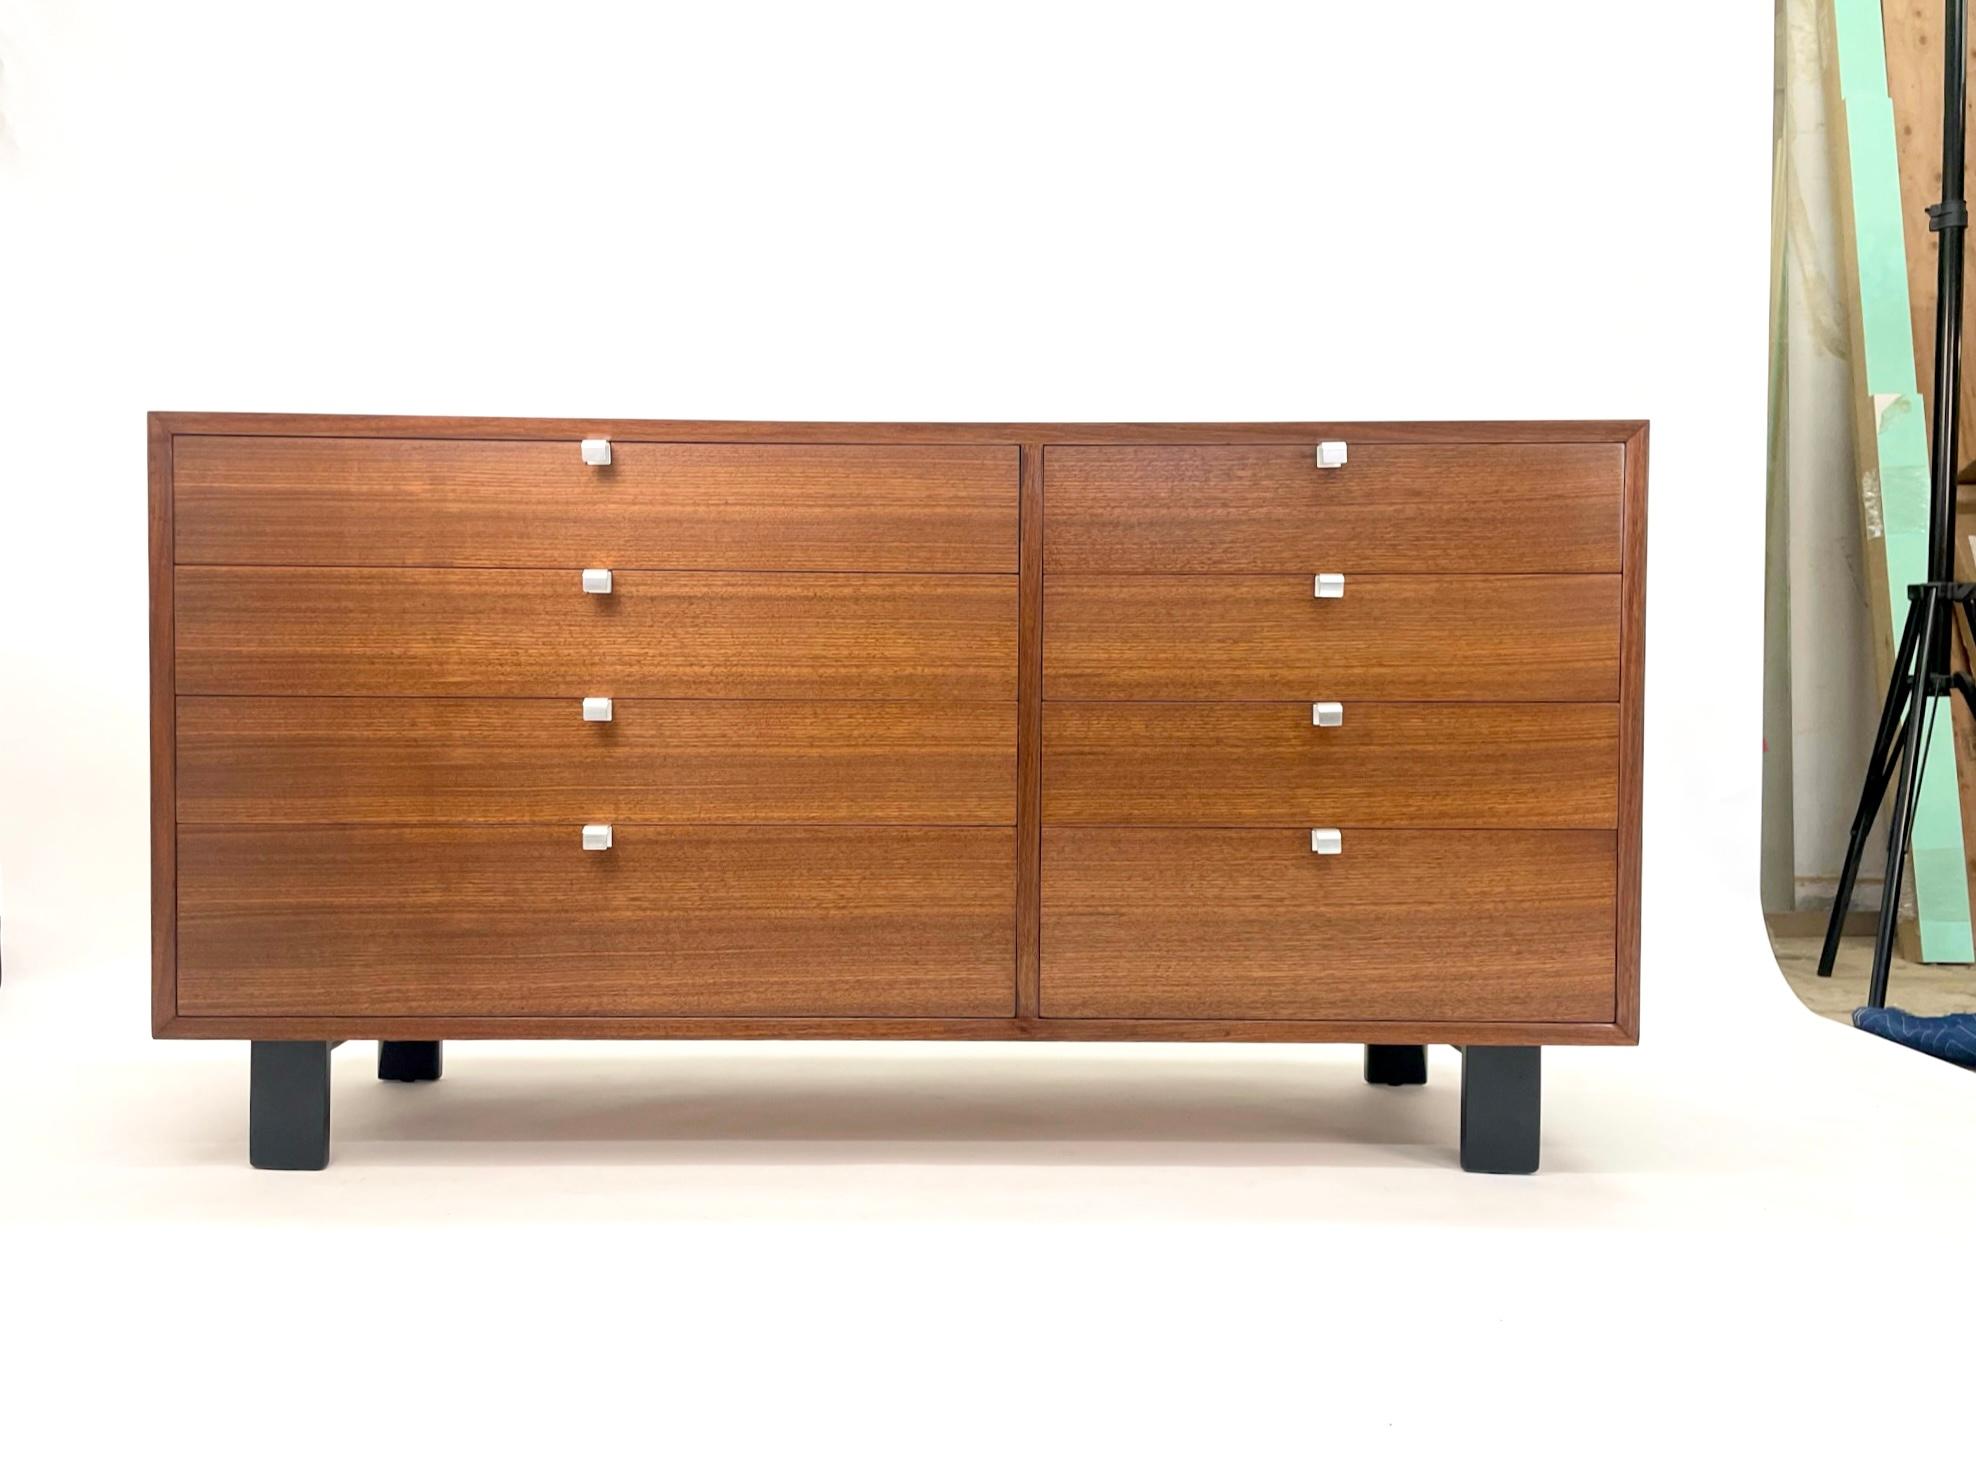 We have 2 iconic and classic Mid-Century Modern dressers designed by George Nelson for the Herman Miller Basic Series, circa 1950s. Featuring a gorgeous walnut wood dresser with eight spacious drawers all adorned with original striking brushed